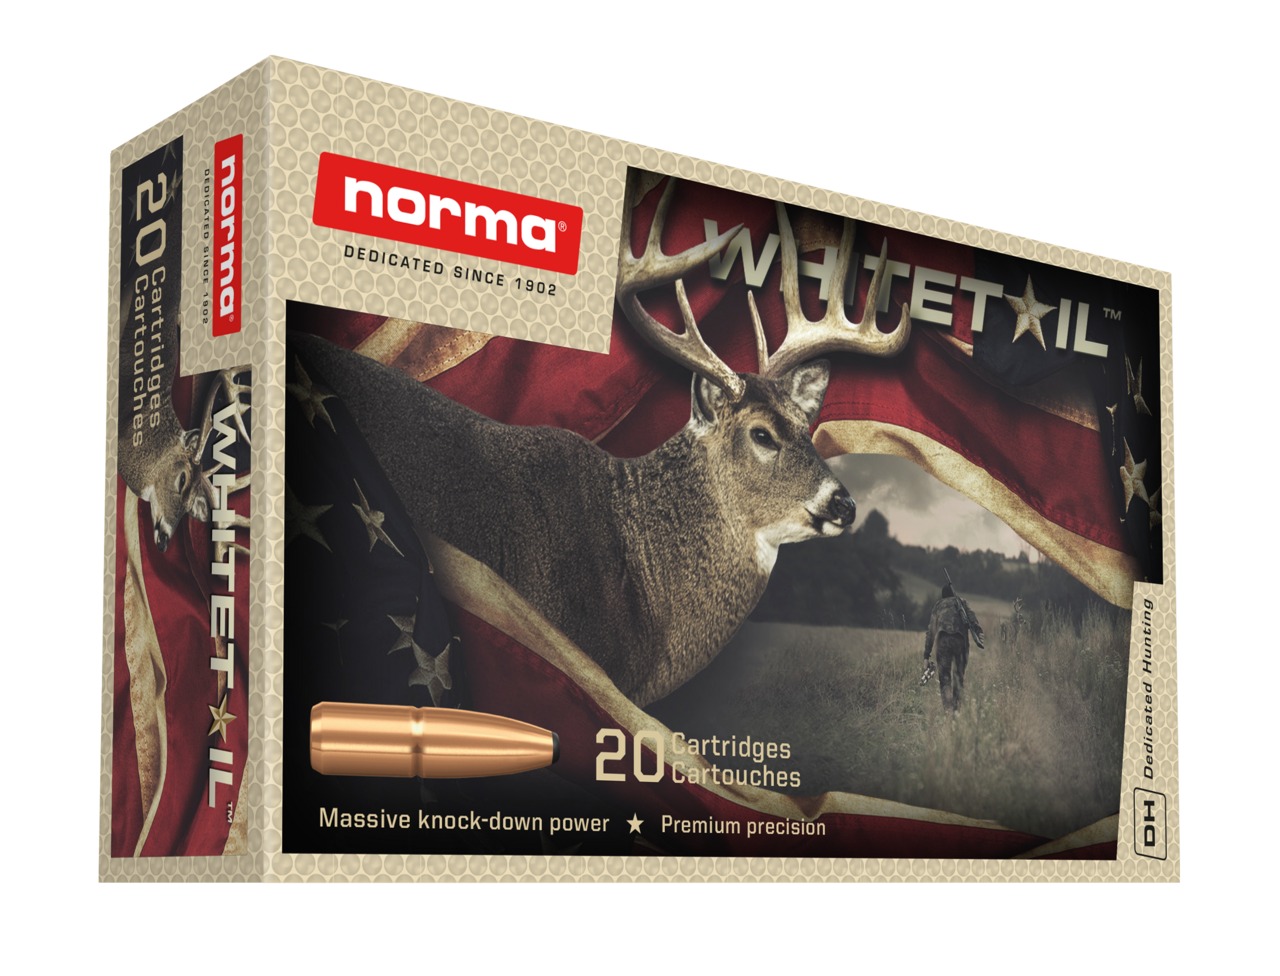 CART NORMA 8X57JS 12.7G/196GR WHITETAIL BTE 20 ref 20180452 NORMA